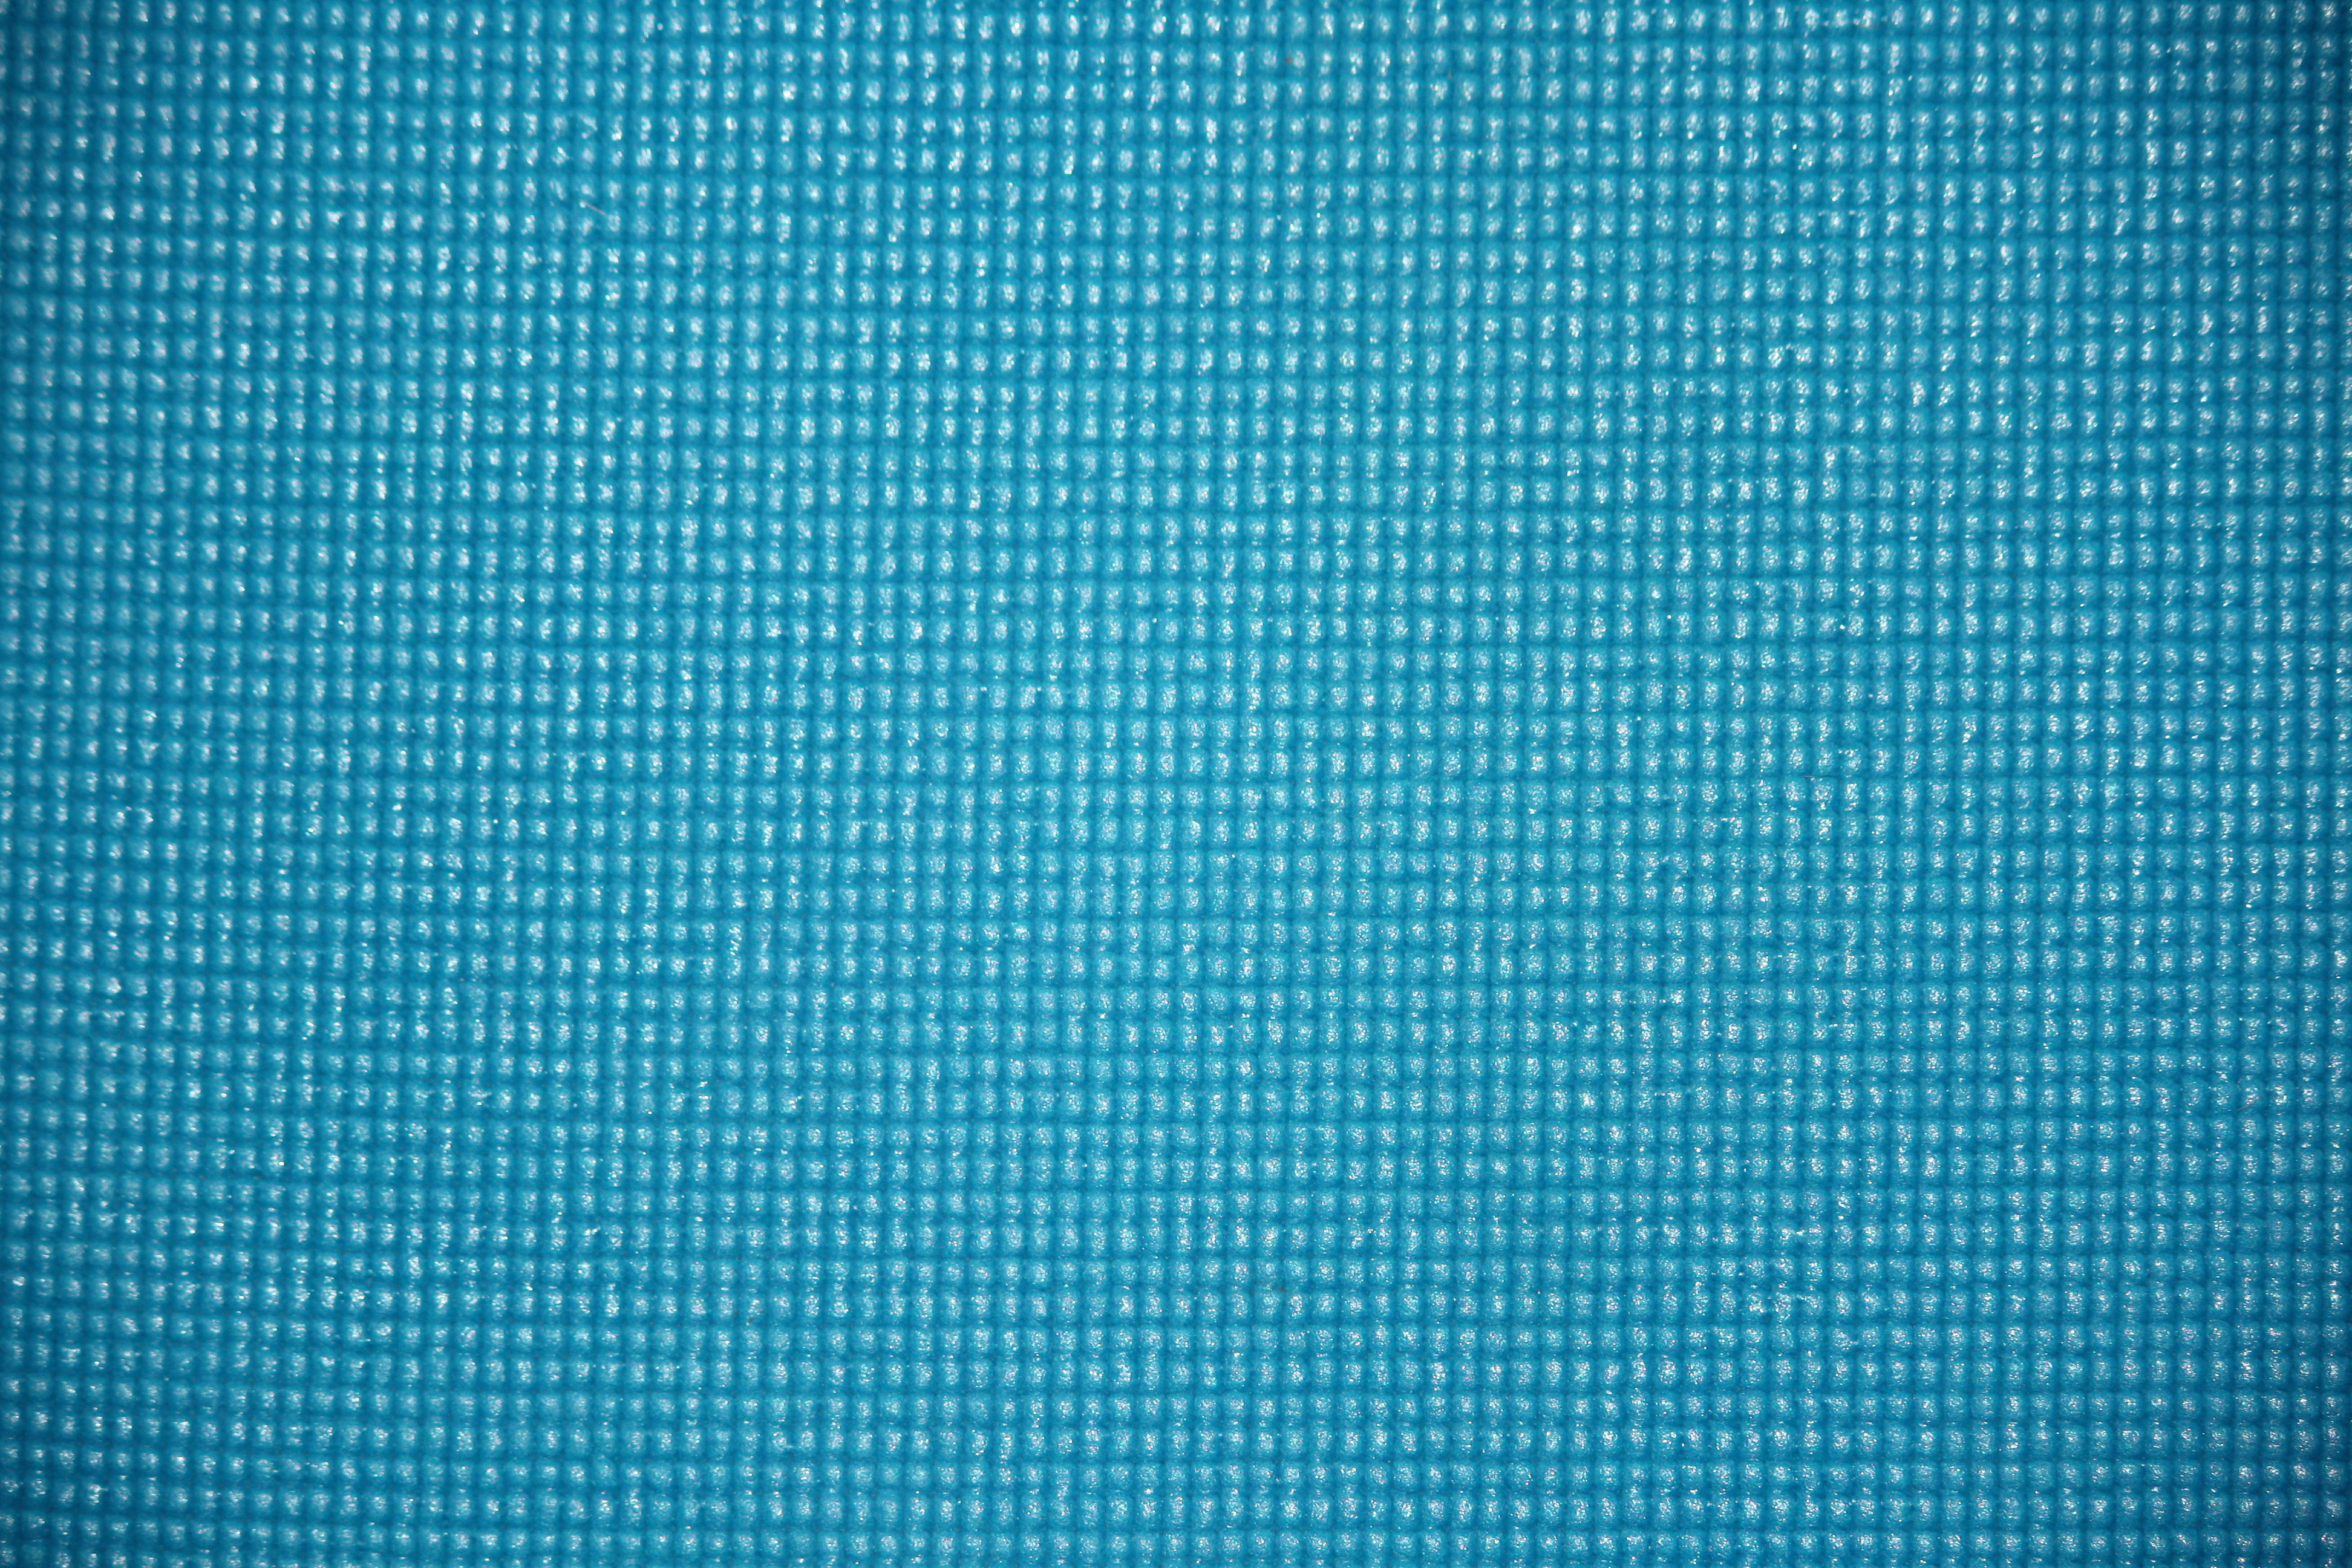 Turquoise Yoga Exercise Mat Texture Picture | Free Photograph | Photos